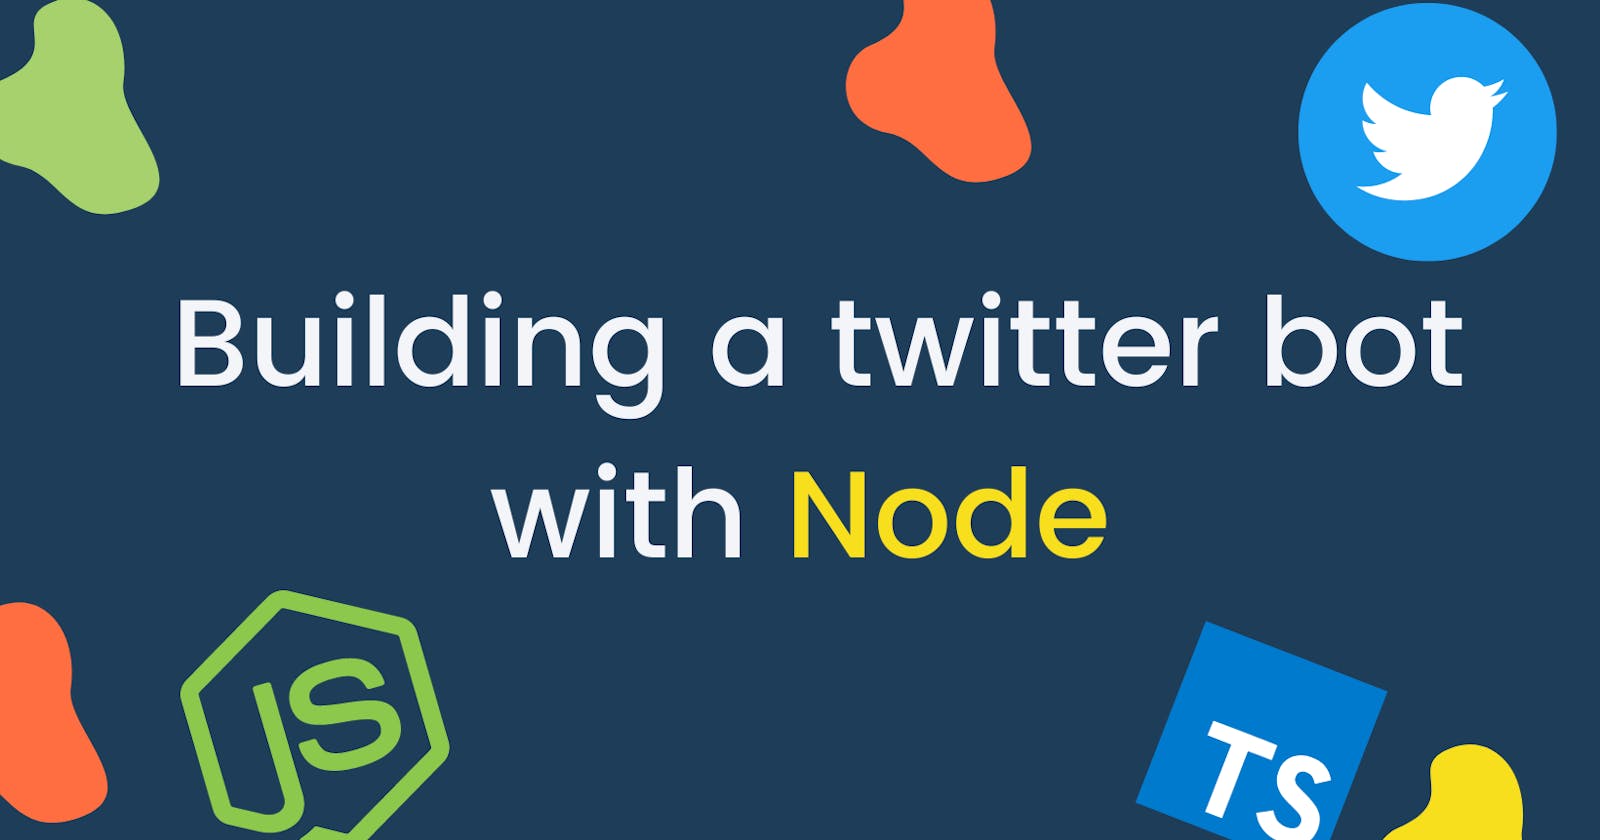 Building a twitter bot with Node